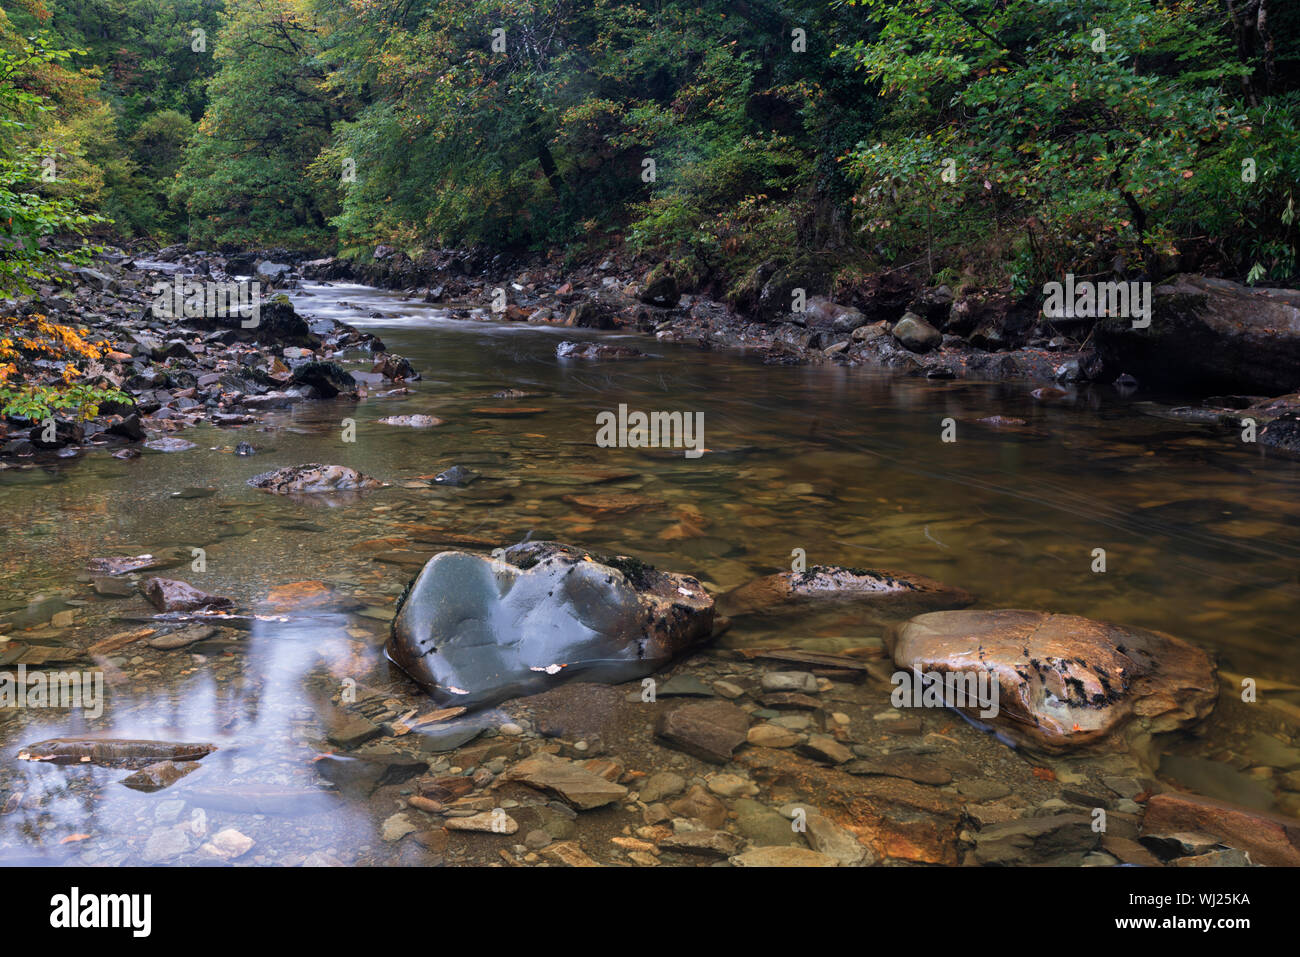 River Gain (Afon Gain) in the Coed-y-Brenin Forest Park. Stock Photo